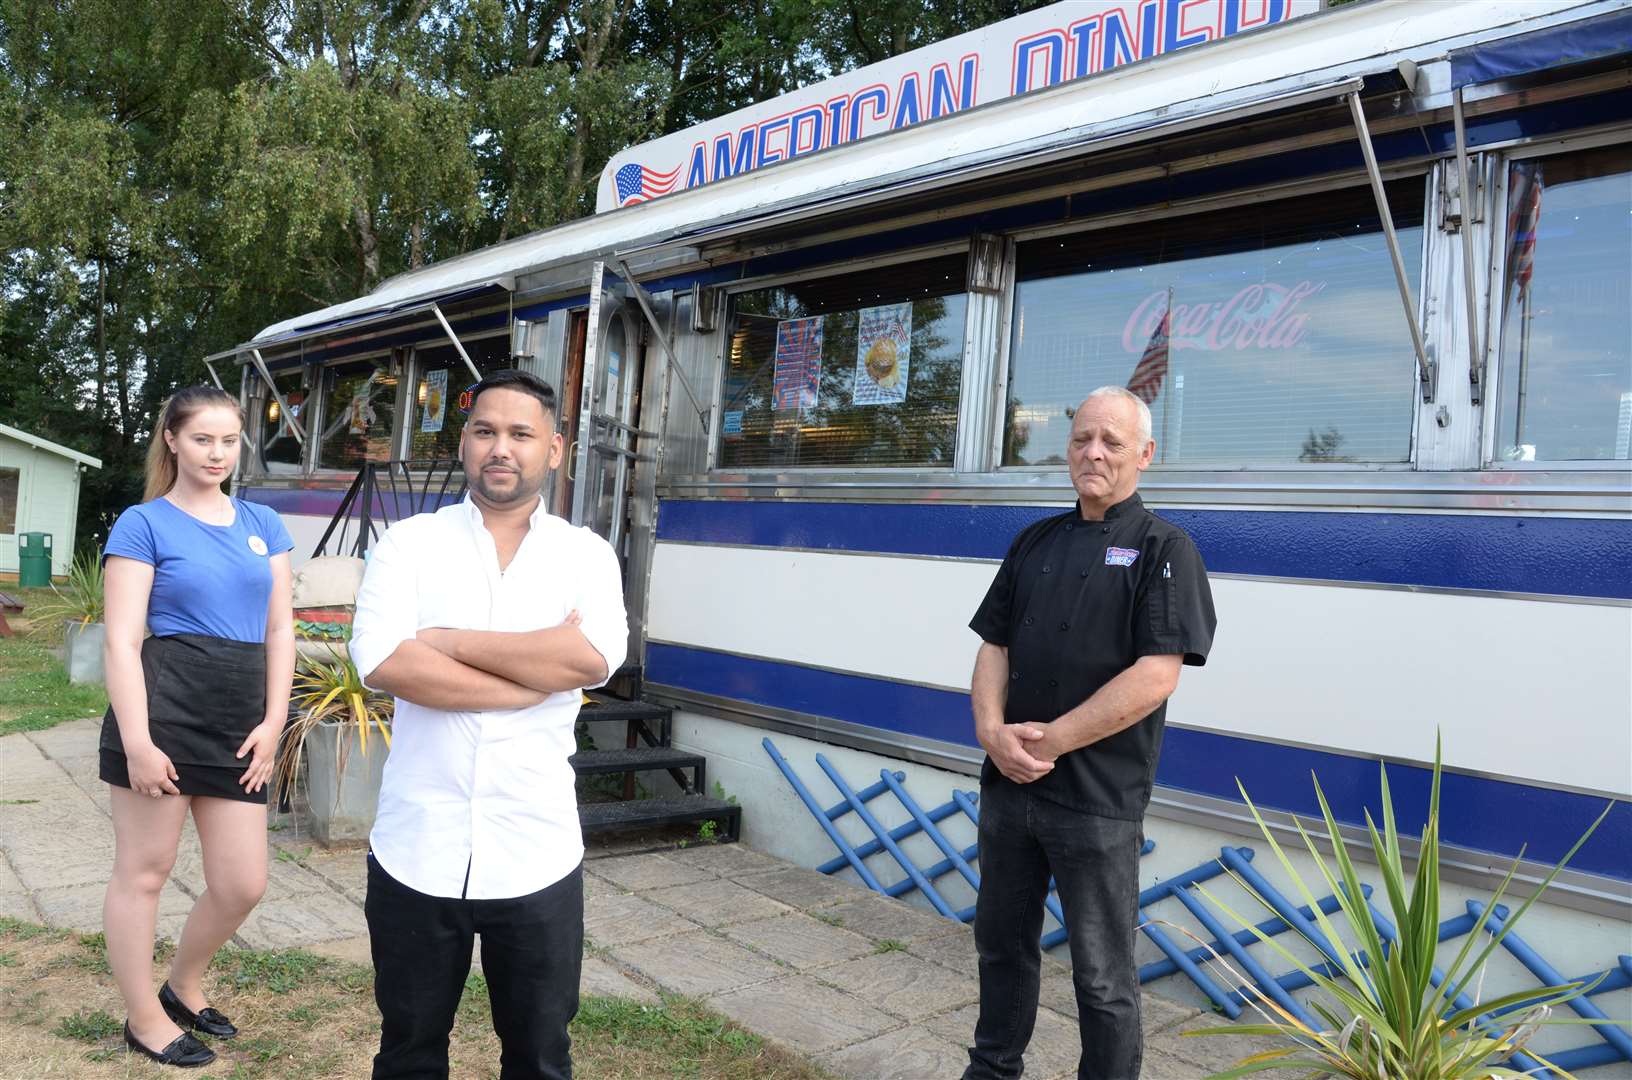 MDM 'Royal' Karim outside the Bybrook Barn diner before it was removed last year